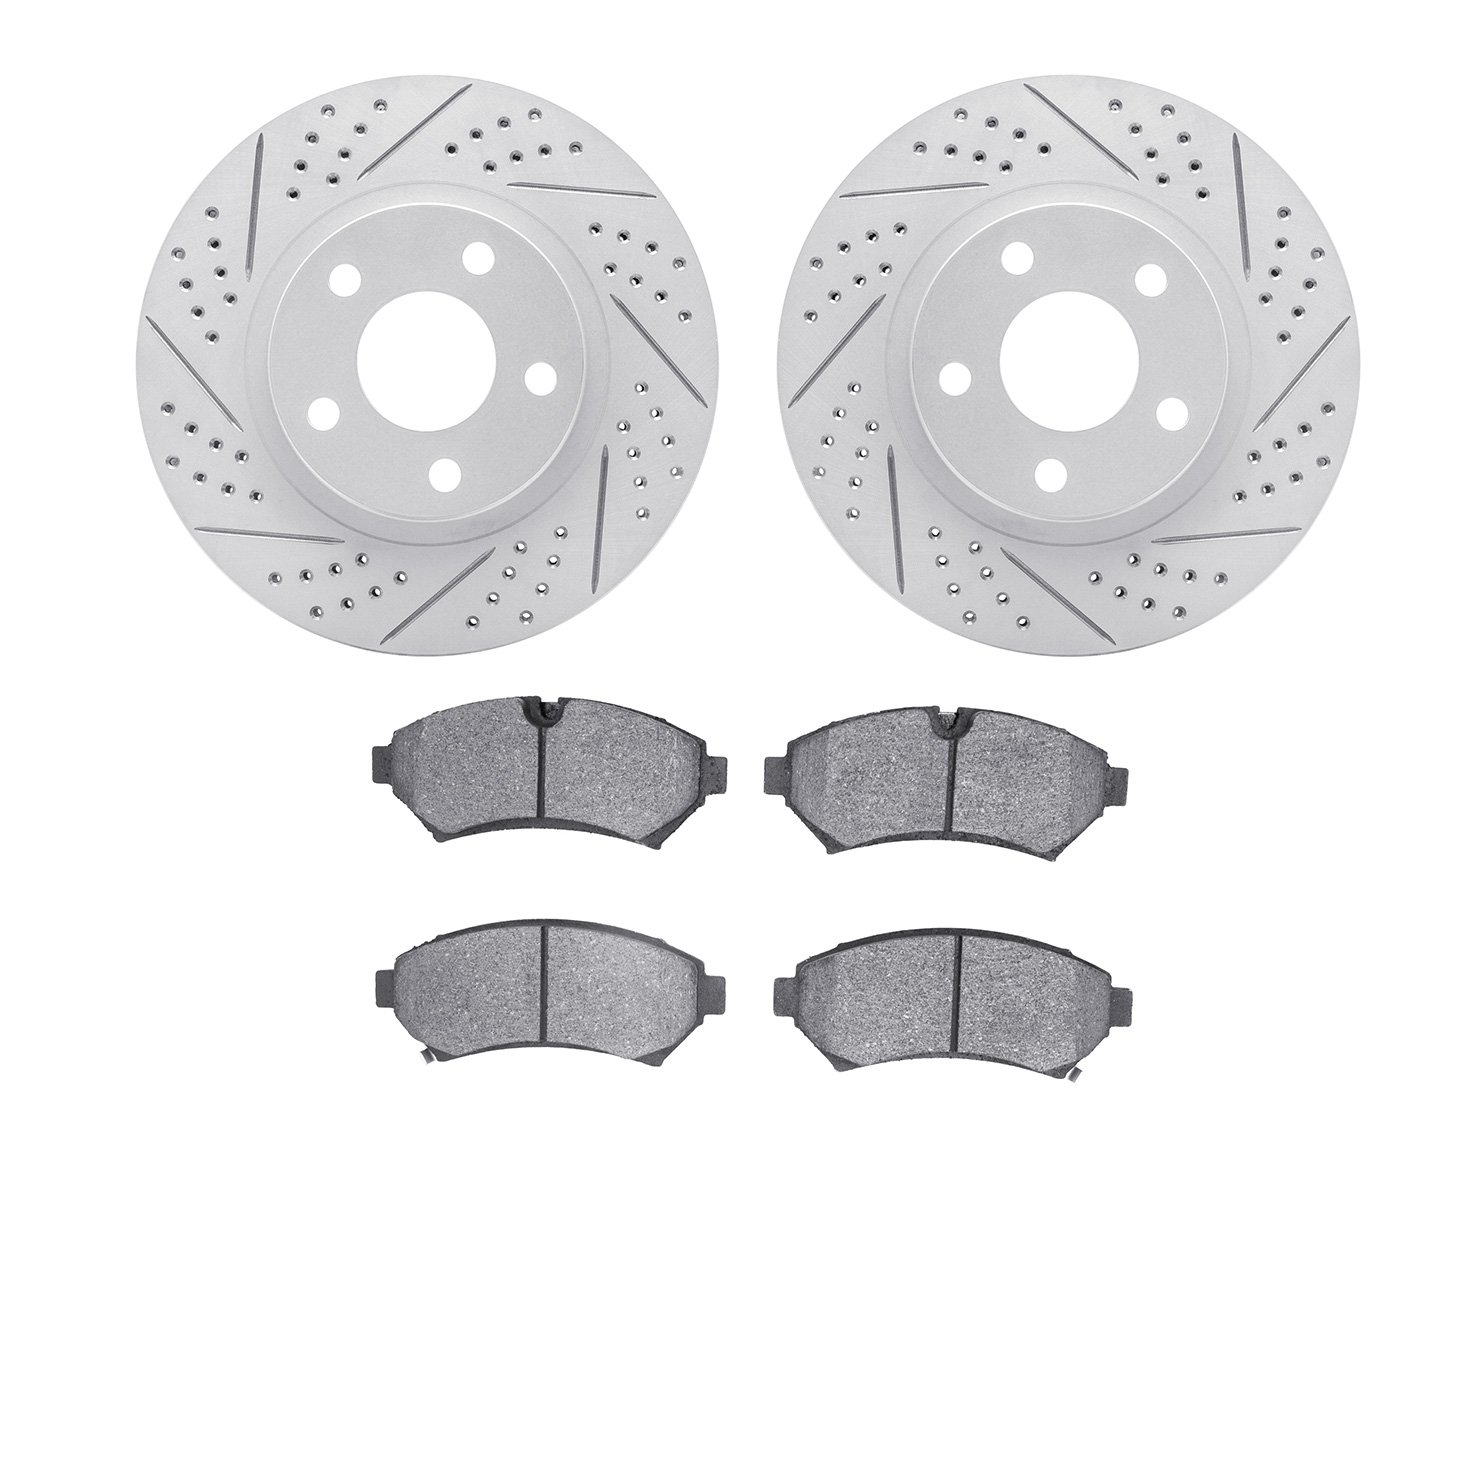 2502-45005 Geoperformance Drilled/Slotted Rotors w/5000 Advanced Brake Pads Kit, 1998-2002 GM, Position: Front